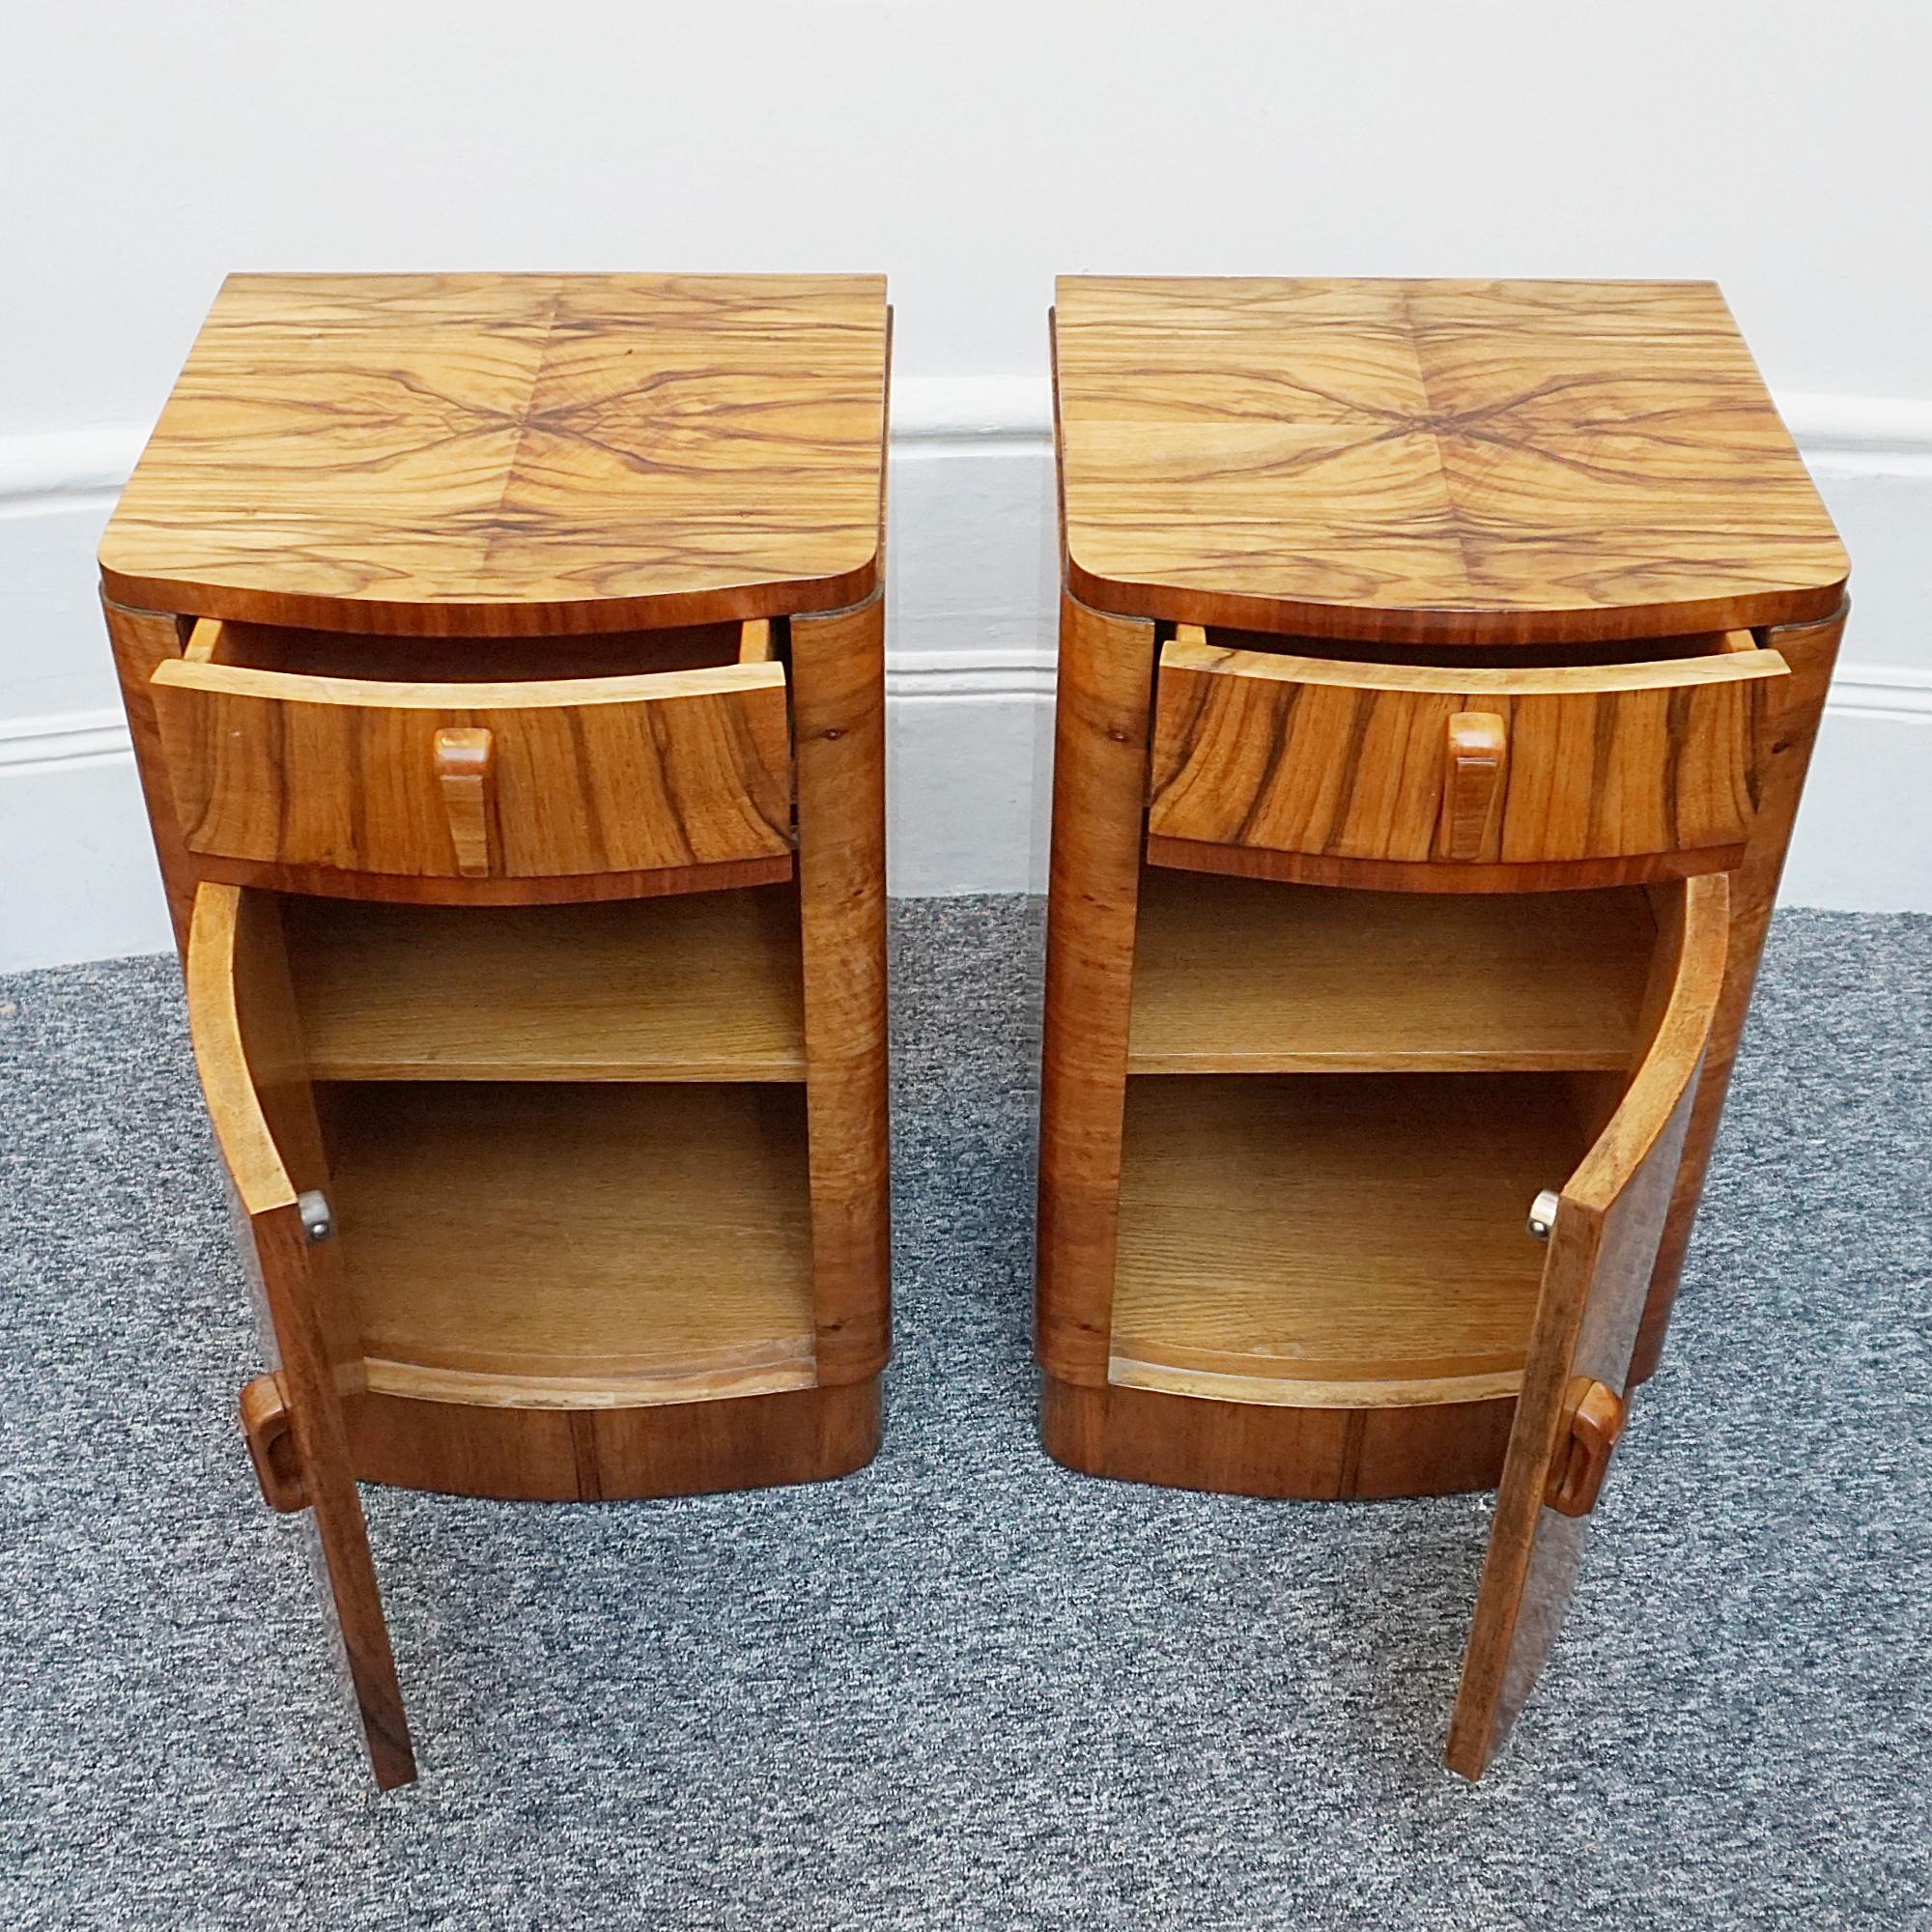 A pair of Art Deco bedside cabinets. Burr walnut veneered with figured walnut banding and original carved handles.

Dimensions: H 67cm W 38.5cm D 39cm

Origin: English 

Date: Circa 1935 

Item Number: 0812235